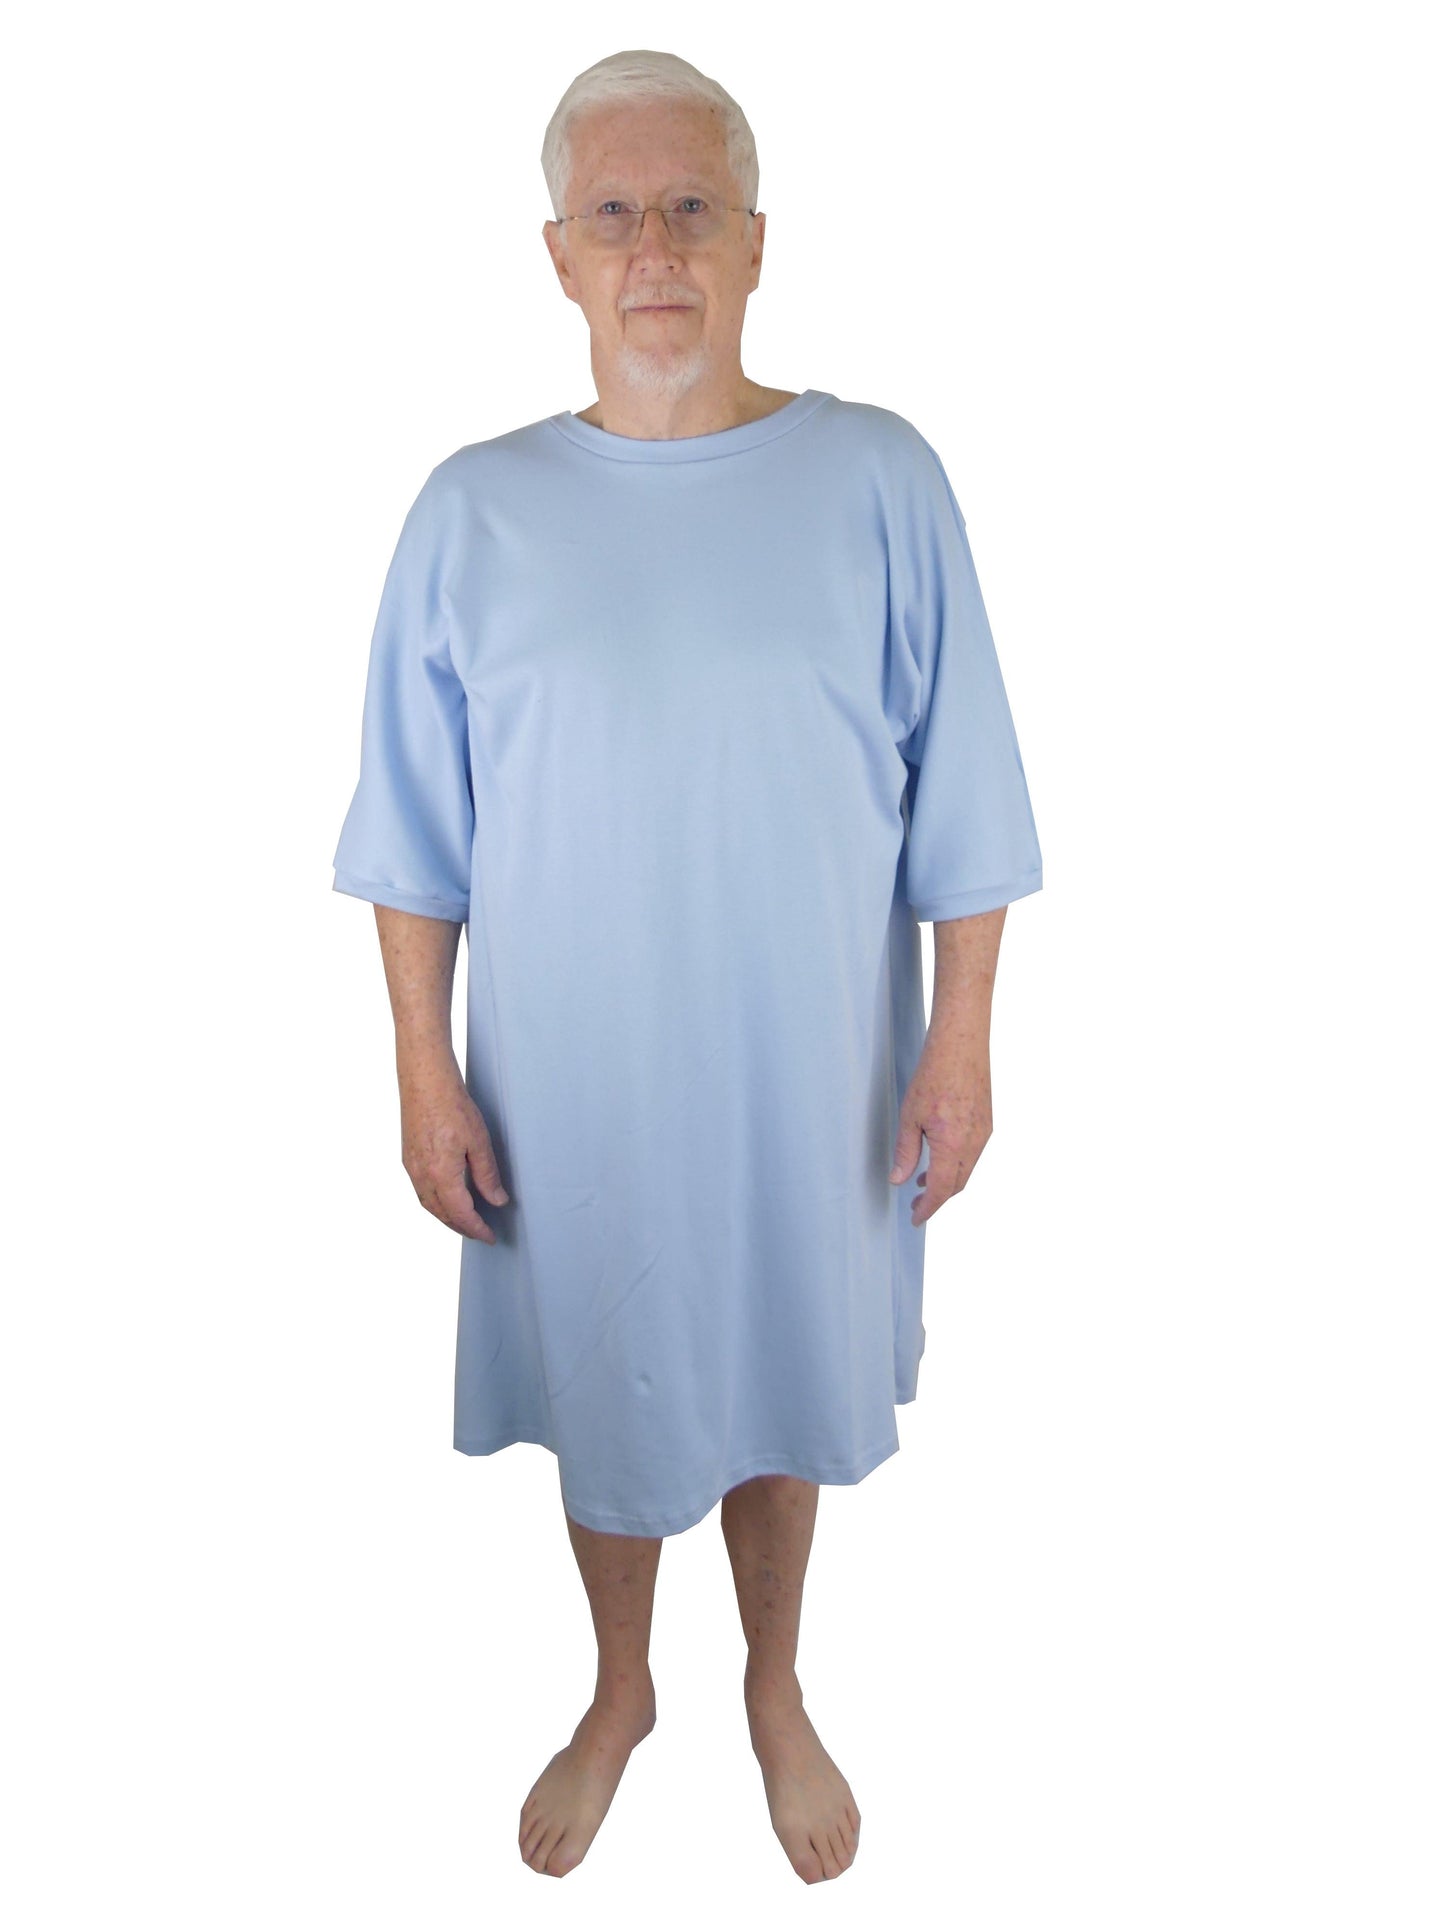 nightwear for disabled